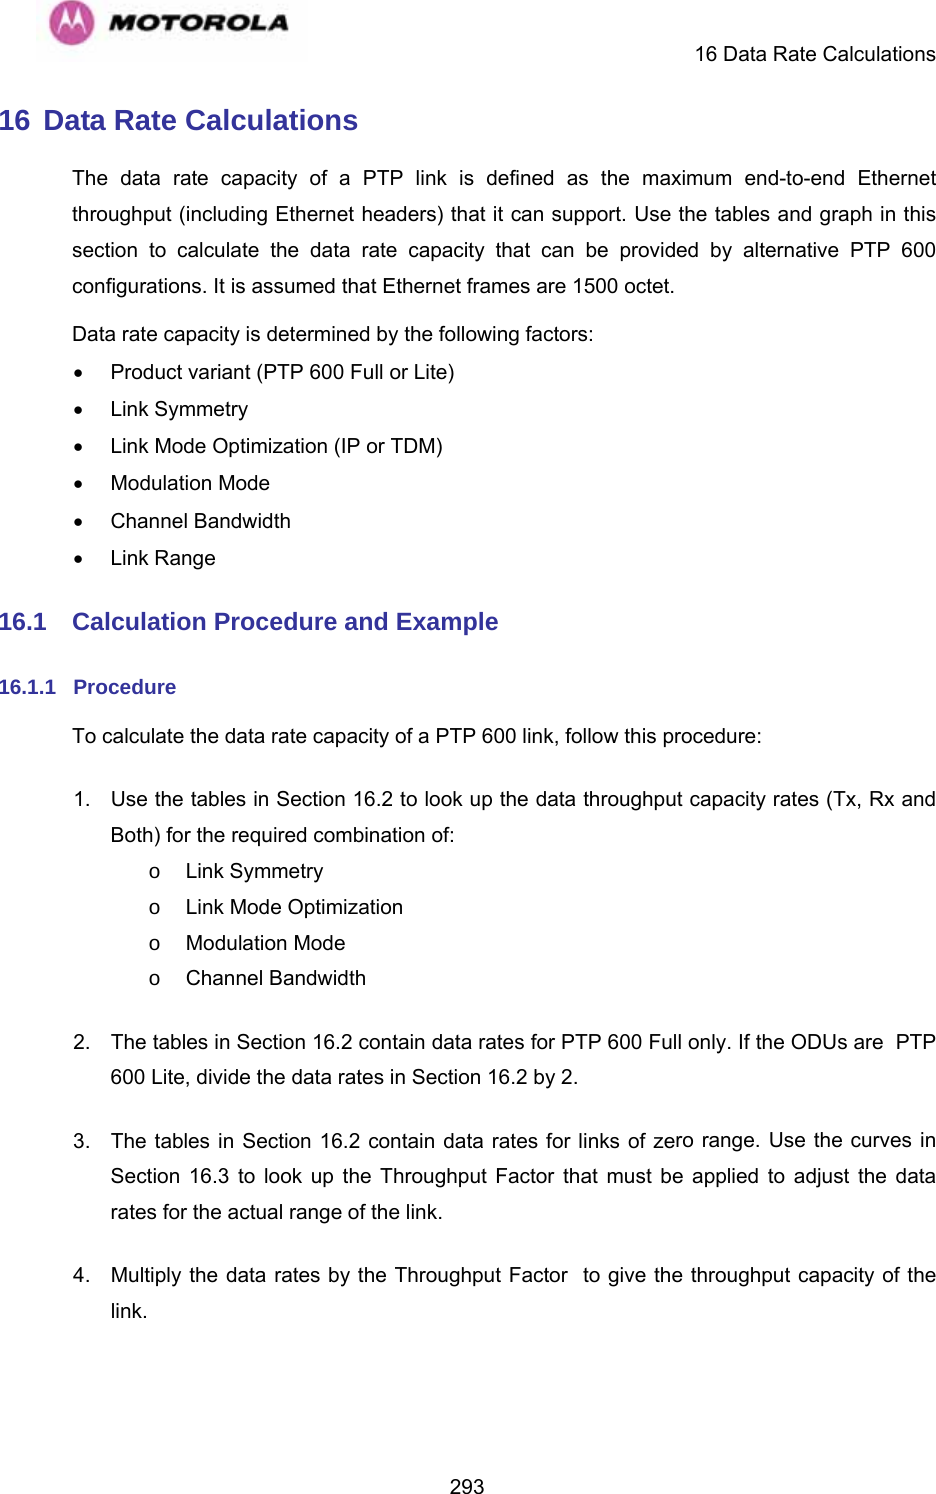     16 Data Rate Calculations  29316 Data Rate Calculations The data rate capacity of a PTP link is defined as the maximum end-to-end Ethernet throughput (including Ethernet headers) that it can support. Use the tables and graph in this section to calculate the data rate capacity that can be provided by alternative PTP 600 configurations. It is assumed that Ethernet frames are 1500 octet. Data rate capacity is determined by the following factors: •  Product variant (PTP 600 Full or Lite) • Link Symmetry •  Link Mode Optimization (IP or TDM) • Modulation Mode • Channel Bandwidth • Link Range 16.1  Calculation Procedure and Example 16.1.1  Procedure To calculate the data rate capacity of a PTP 600 link, follow this procedure: 1.  Use the tables in Section 16.2 to look up the data throughput capacity rates (Tx, Rx and Both) for the required combination of: o Link Symmetry o  Link Mode Optimization o Modulation Mode o Channel Bandwidth 2.  The tables in Section 16.2 contain data rates for PTP 600 Full only. If the ODUs are  PTP 600 Lite, divide the data rates in Section 16.2 by 2. 3.  The tables in Section 16.2 contain data rates for links of zero range. Use the curves in Section  16.3 to look up the Throughput Factor that must be applied to adjust the data rates for the actual range of the link. 4.  Multiply the data rates by the Throughput Factor  to give the throughput capacity of the link.  